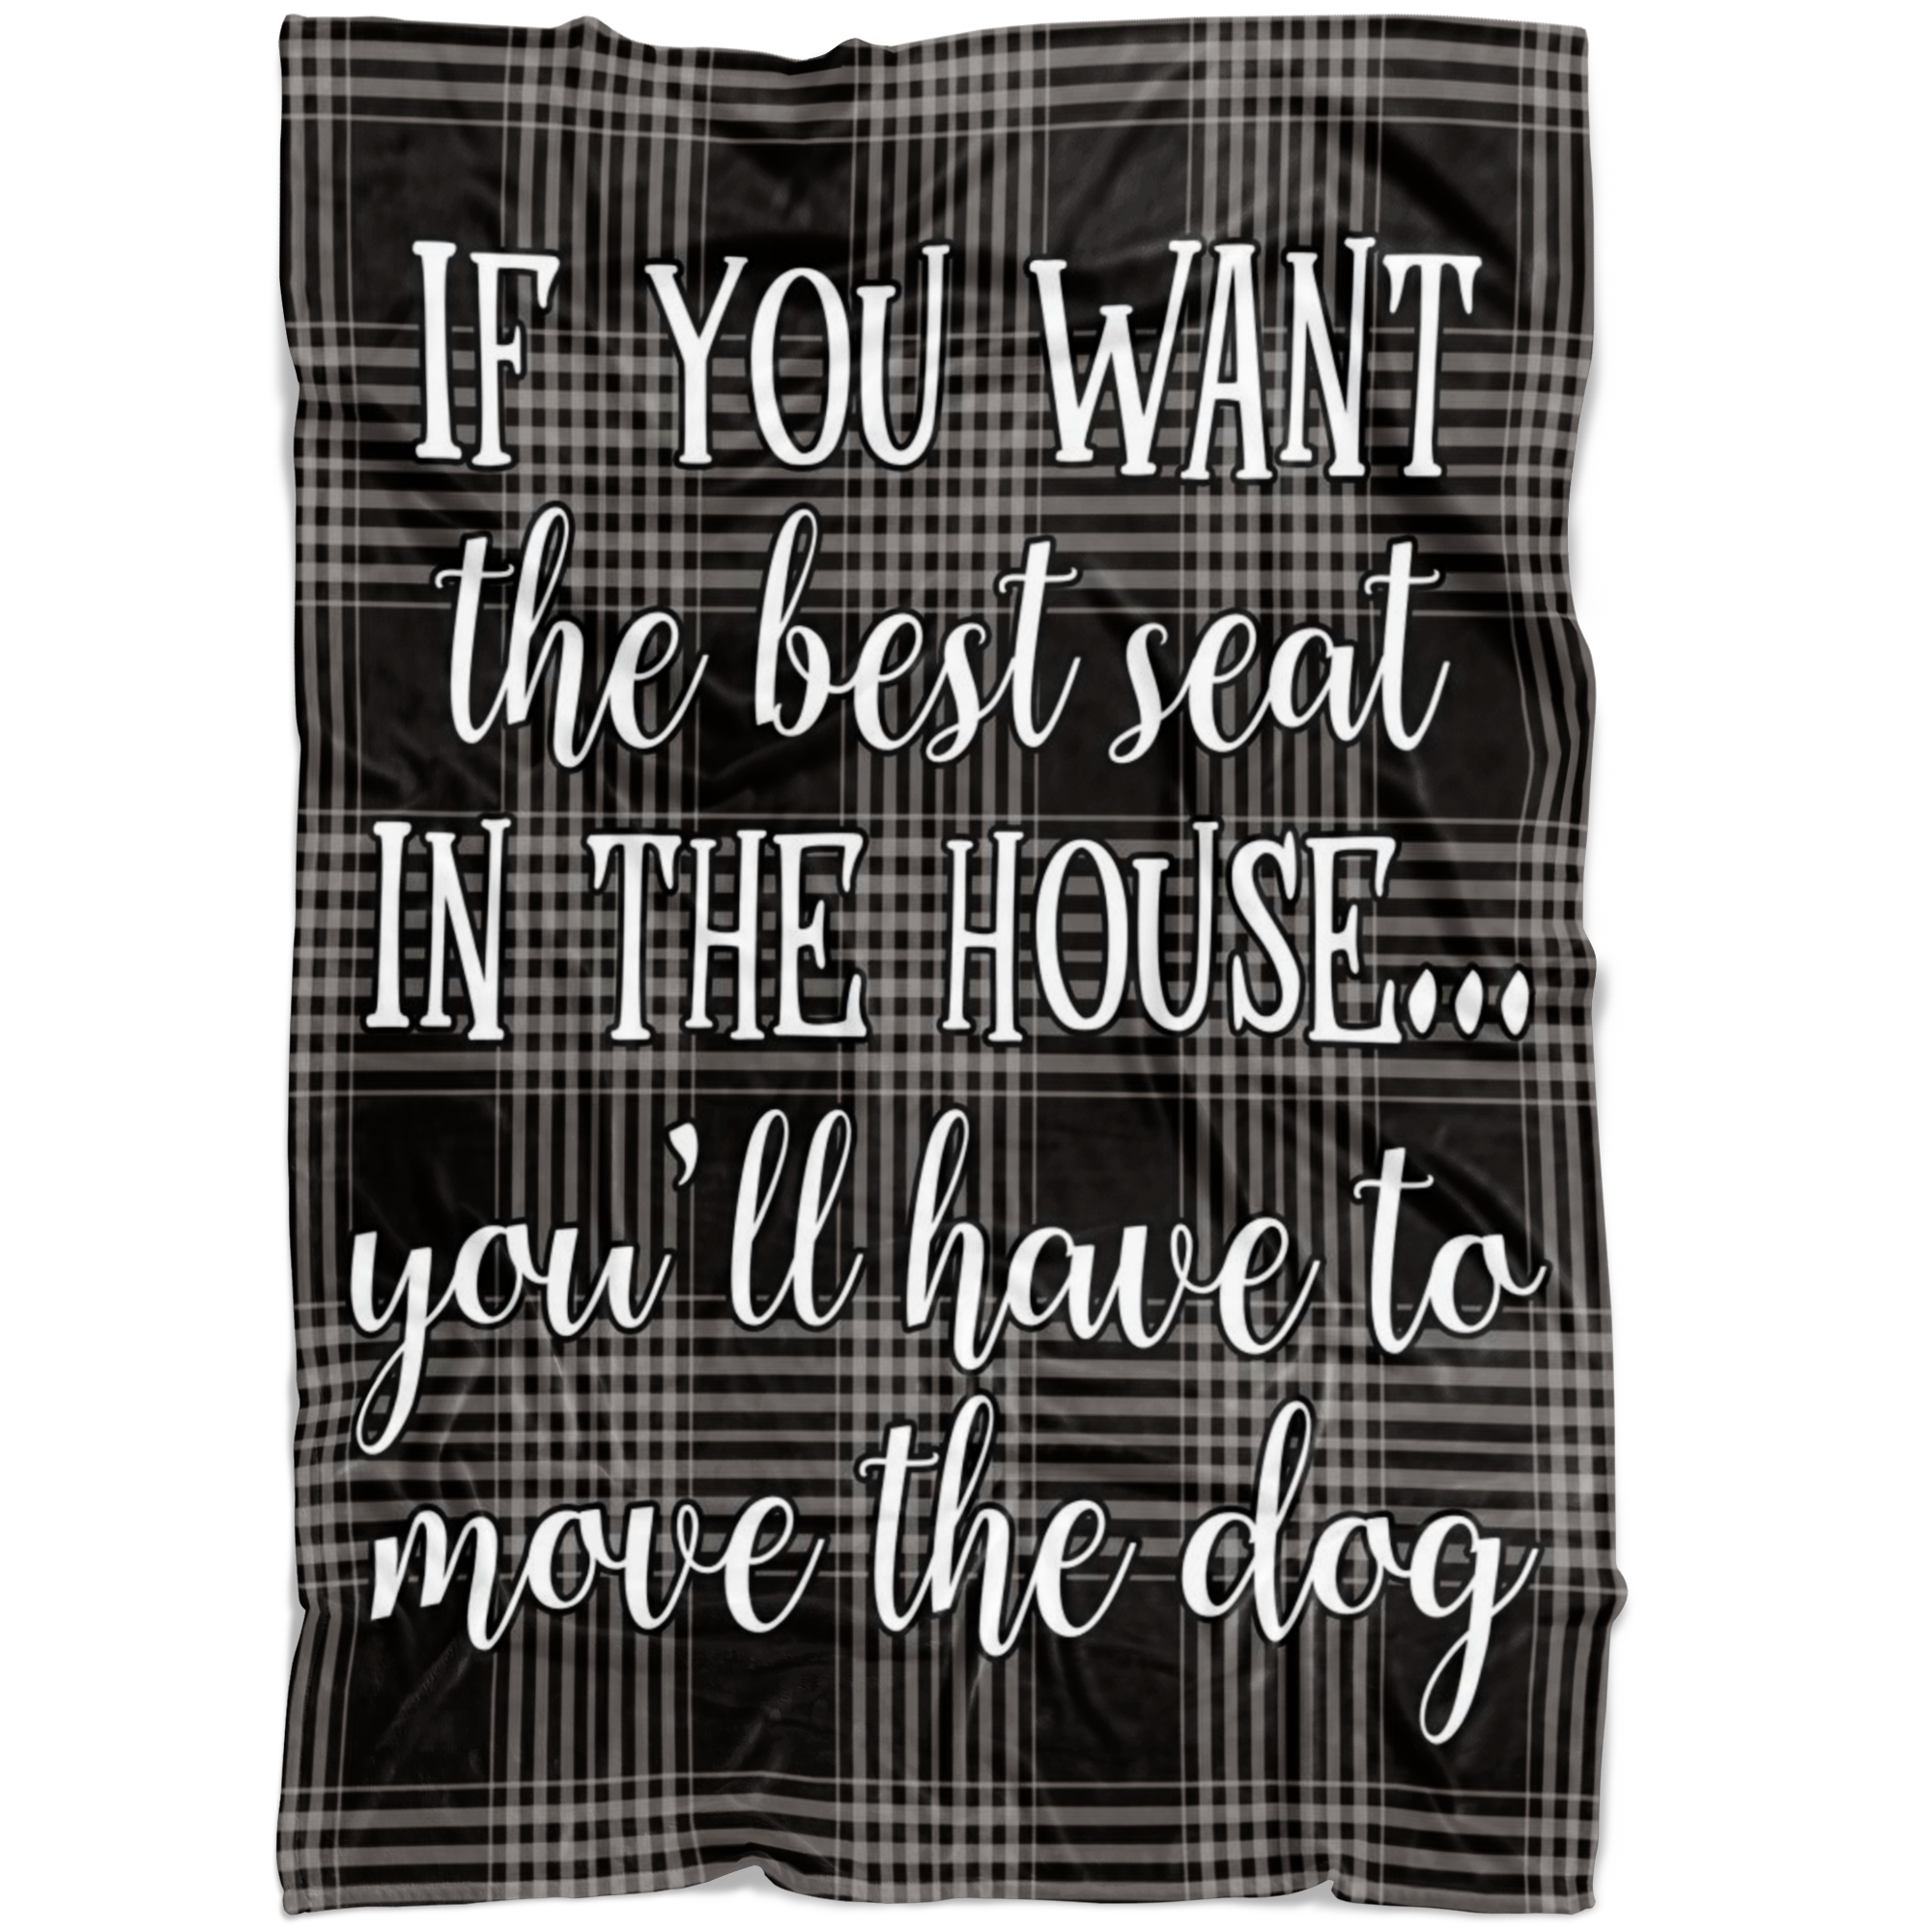 "Best Seat in the House - Move The Dog" Premium Fleece Blanket